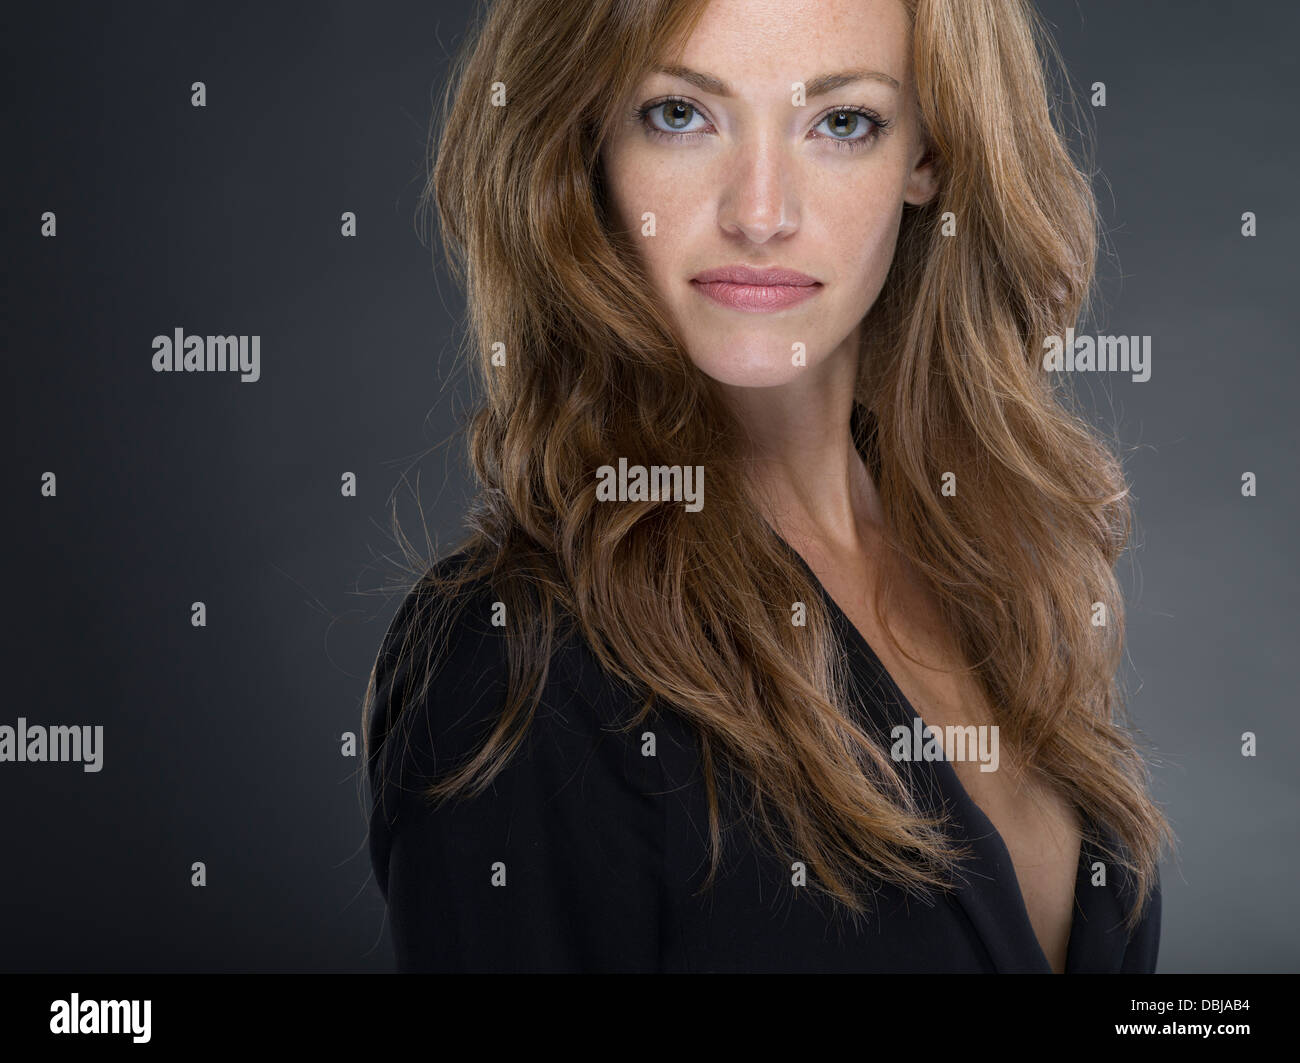 Young Caucasian woman with strawberry blond hair wearing black jacket looking at camera Stock Photo